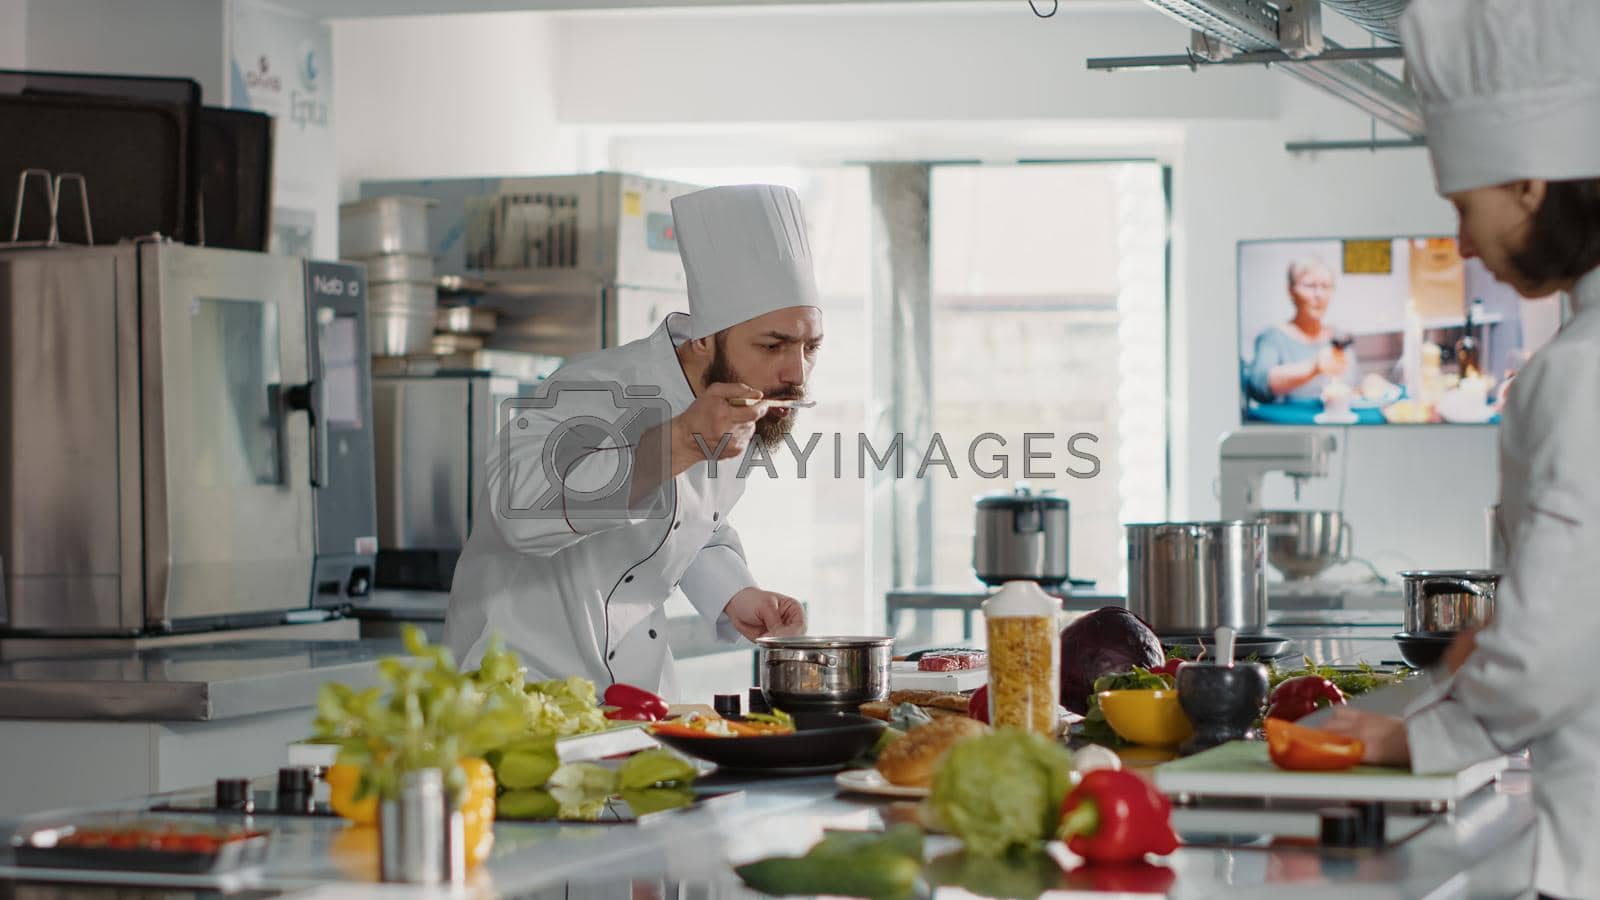 Royalty free image of Professional chef testing soup taste in pot on stove by DCStudio